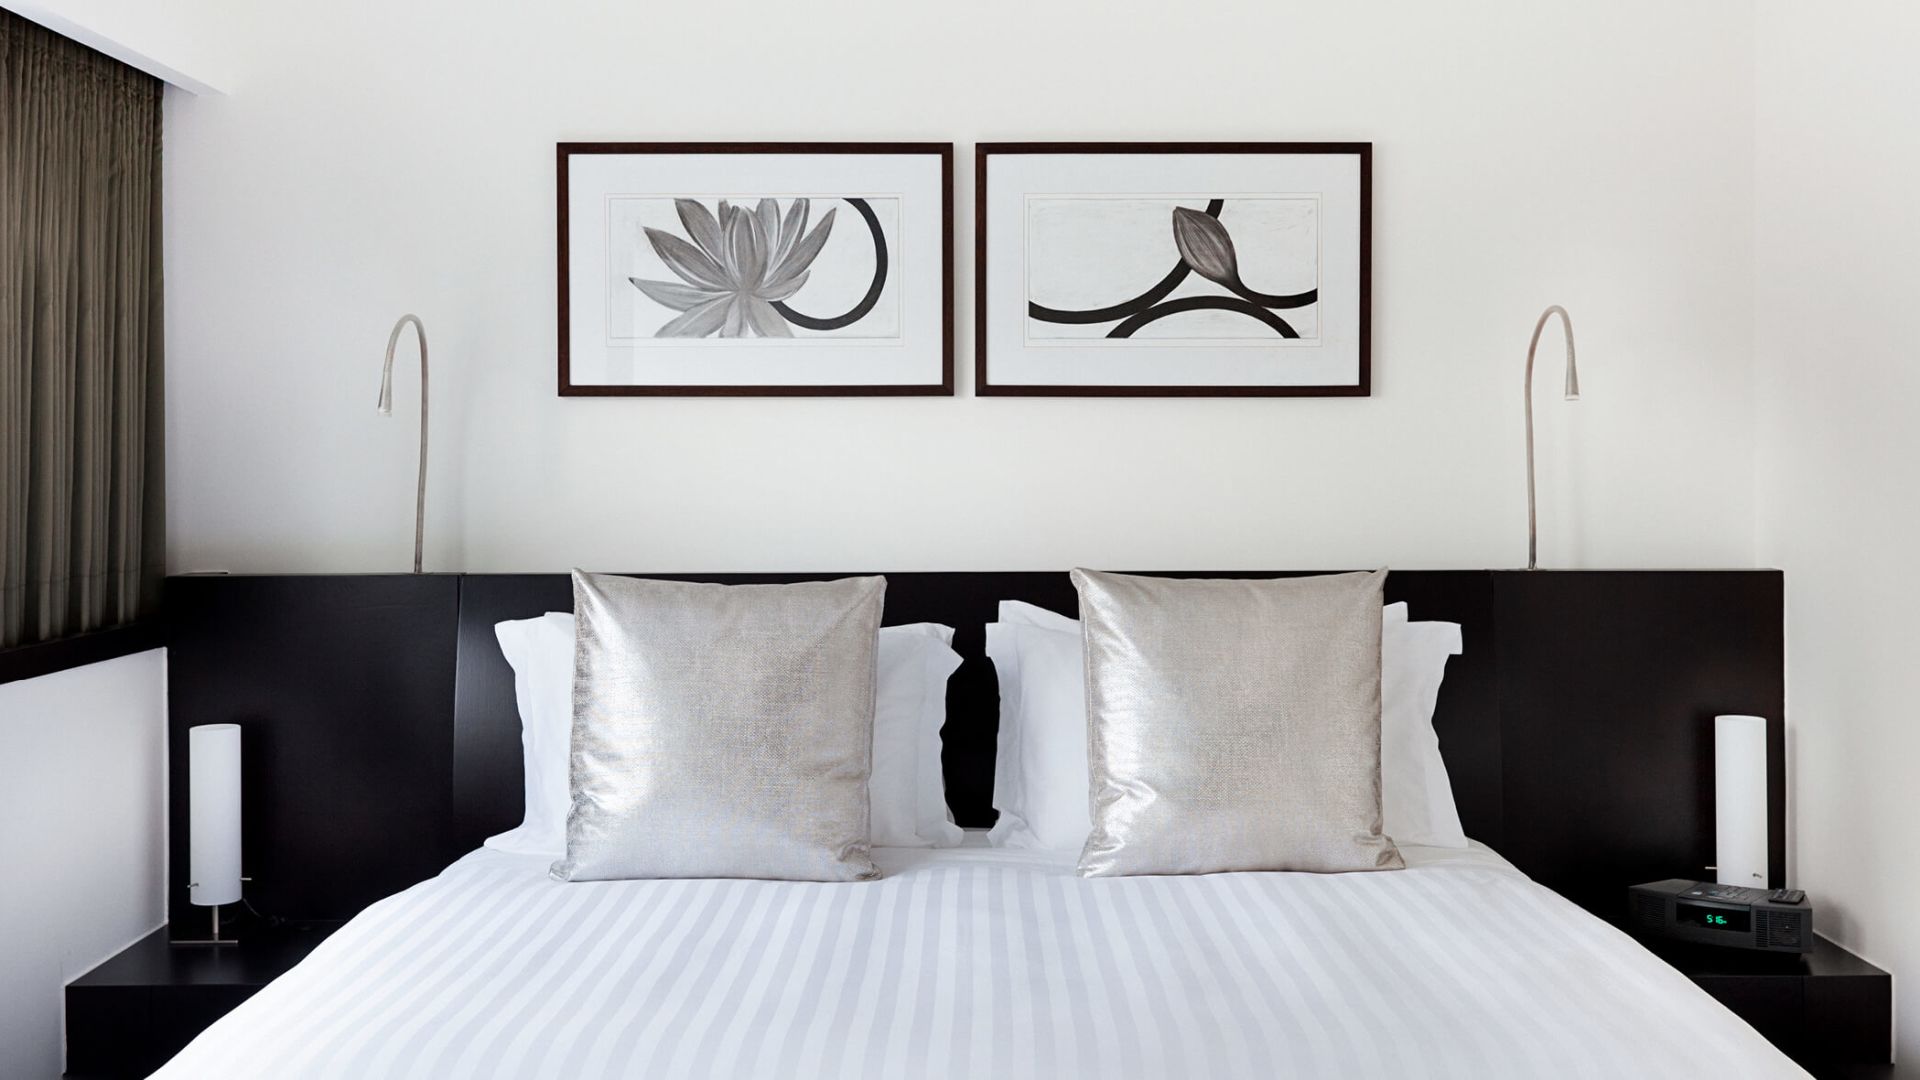 King bed with Egyptian cotton linen - Image